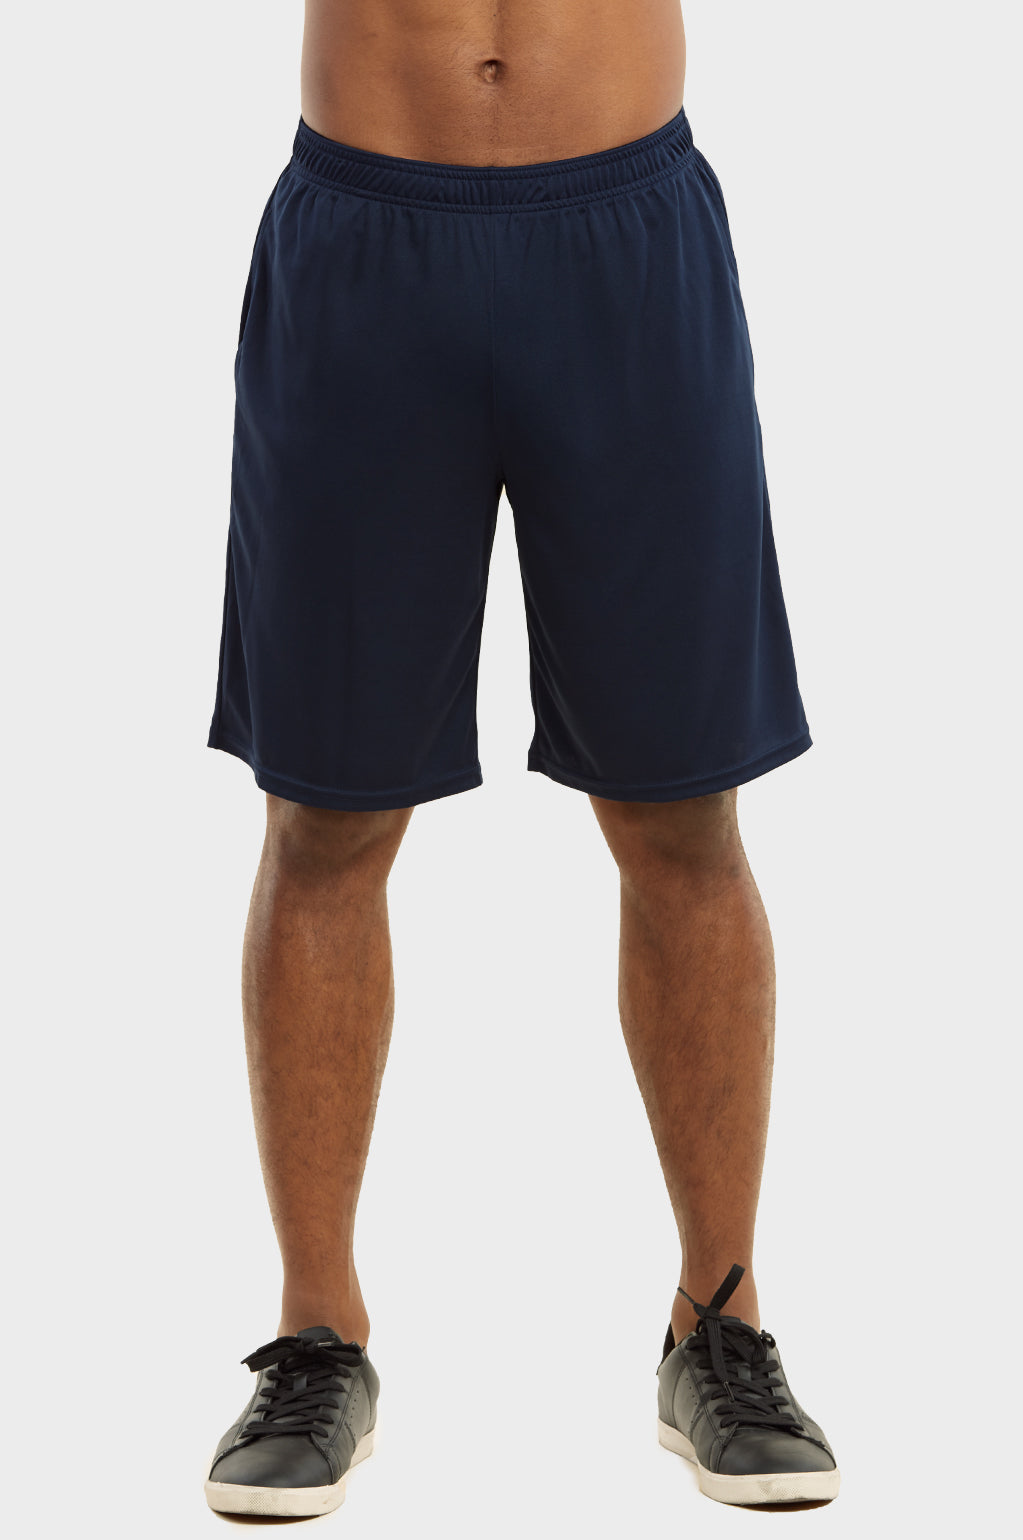 Men's Essentials Knocker Athlectic Shorts (KMS4000_ NVY)